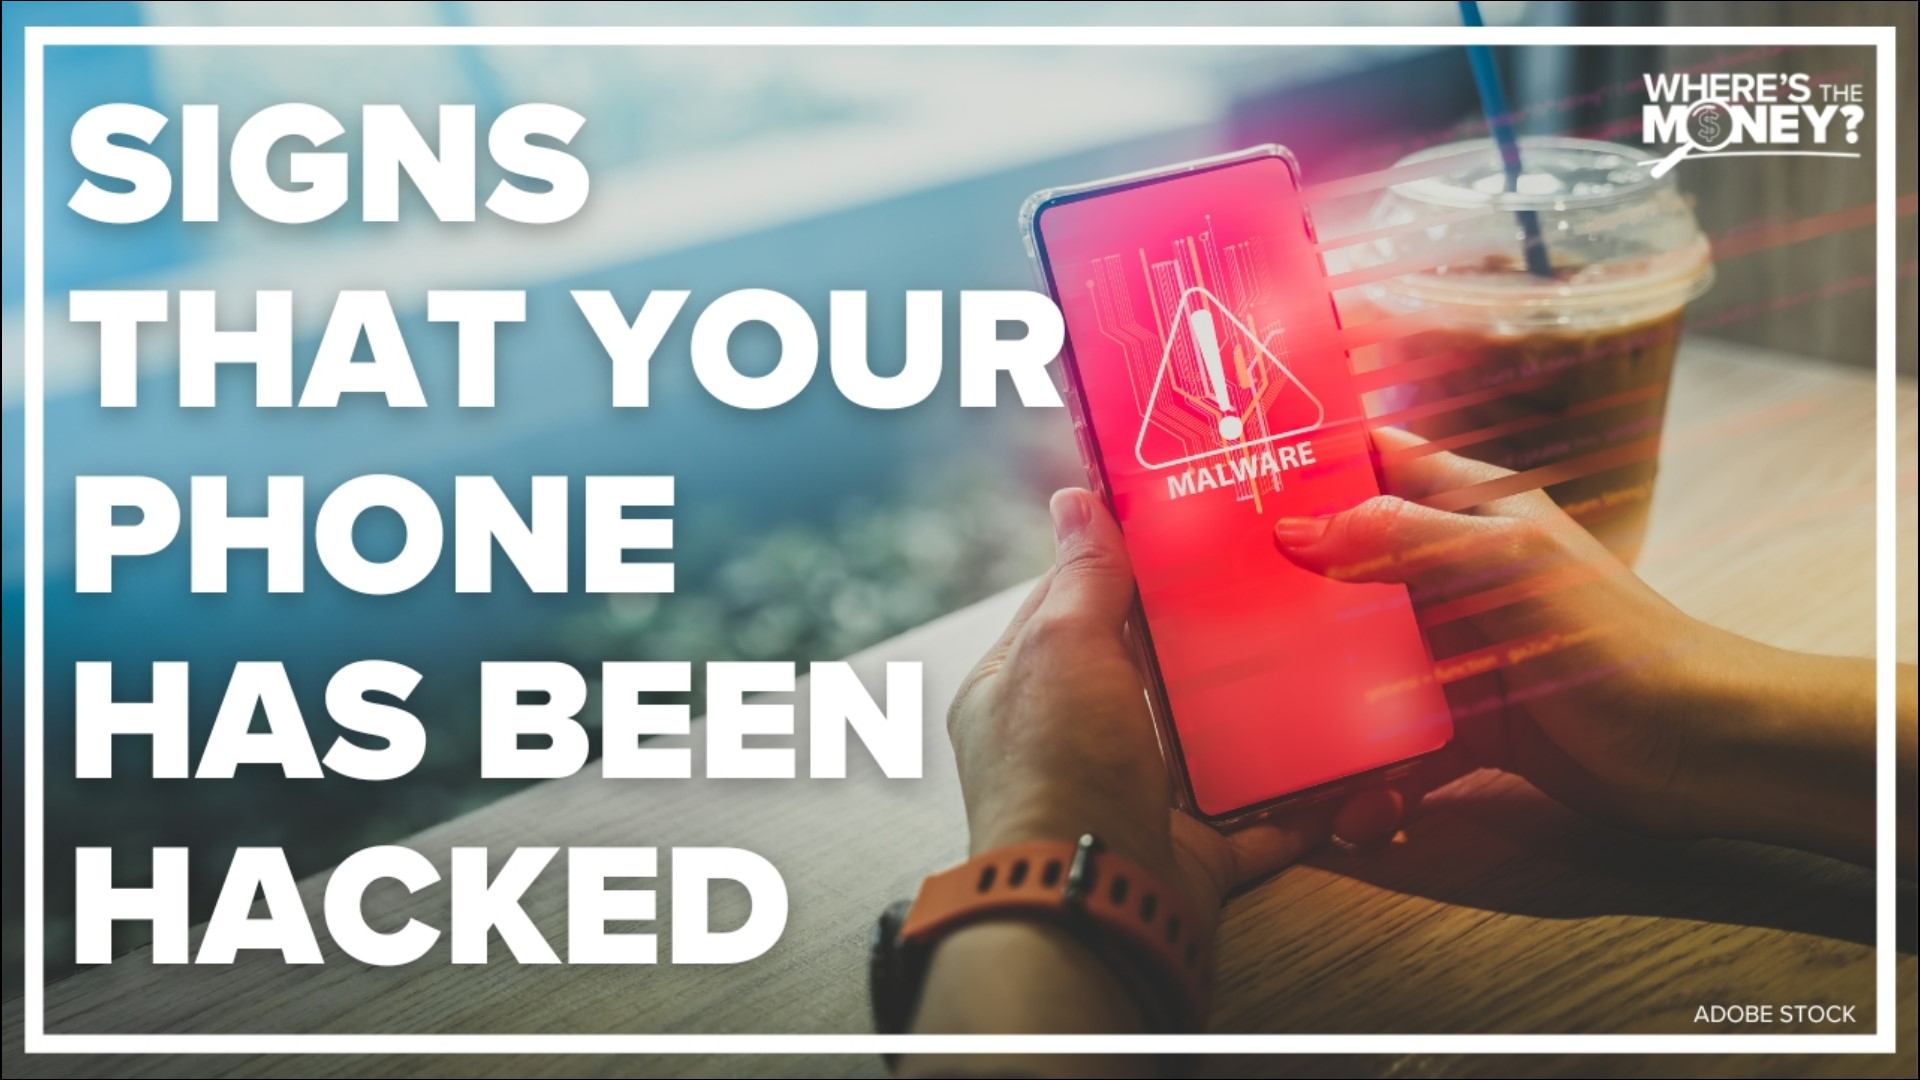 Can your phone not keep a charge? Is it inundated with pop-up ads? These are just some of the signs your phone could be compromised.